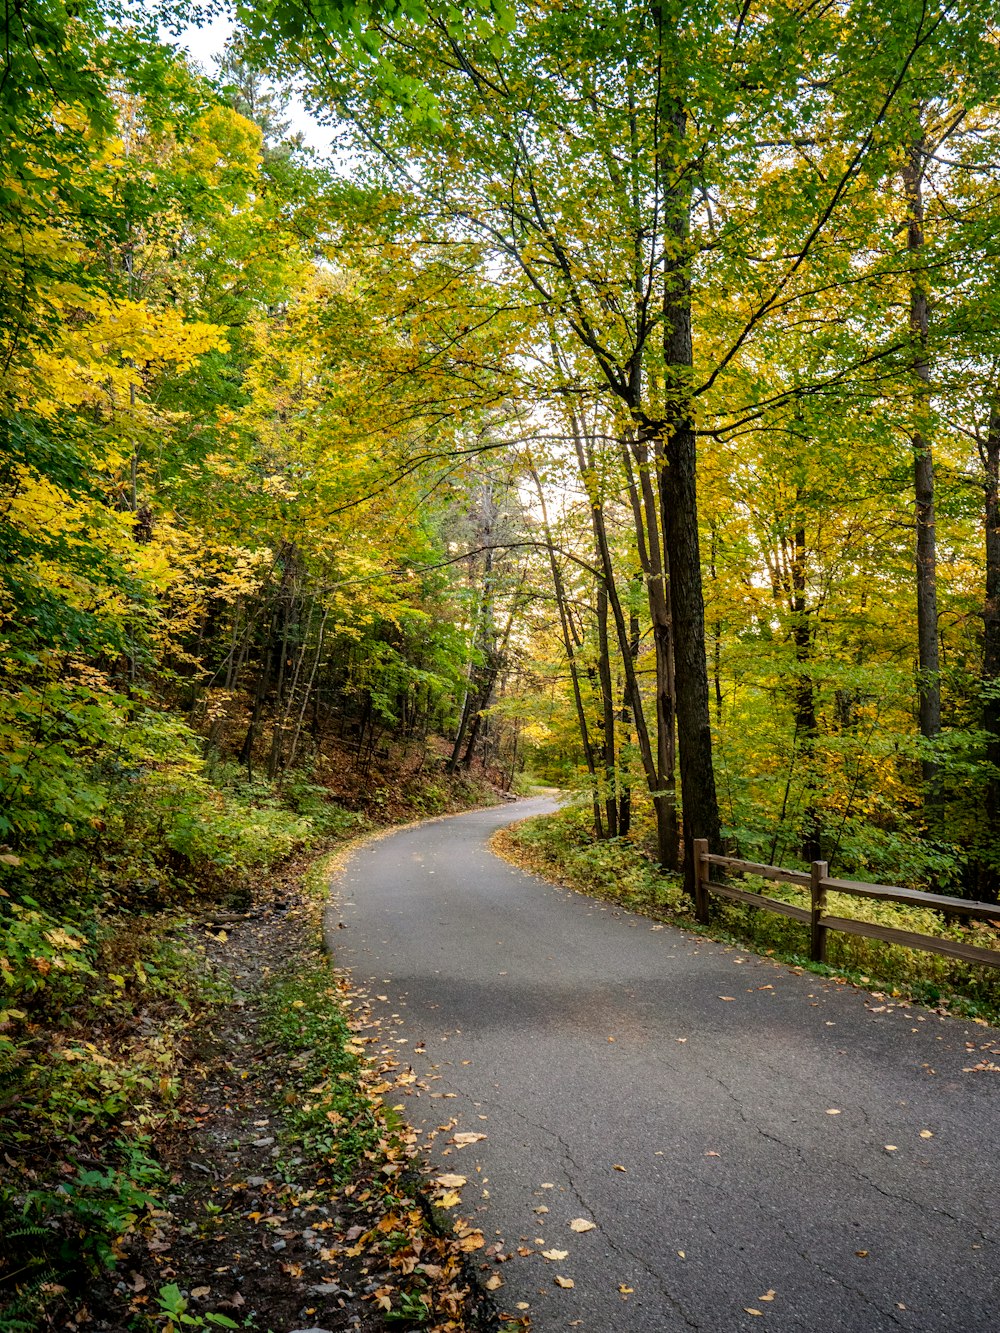 a winding road surrounded by trees in the fall